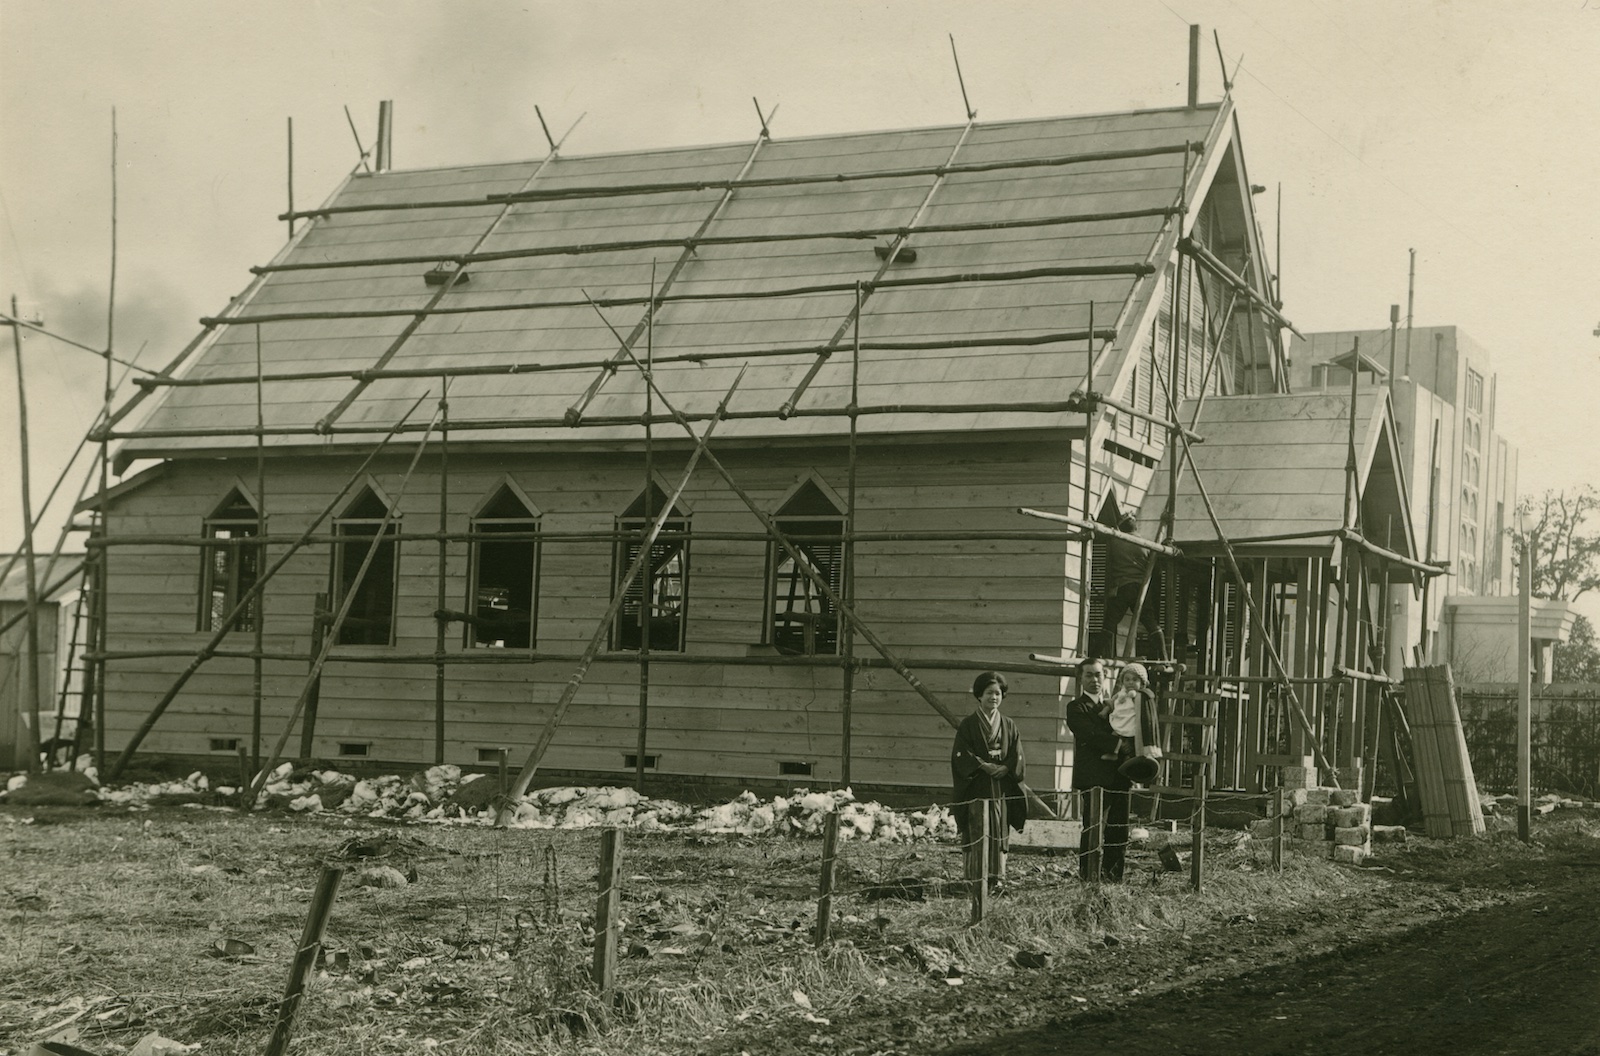 A church under construction in Tokyo, c. 1926. Finnish Heritage Agency (CC BY 4.0).